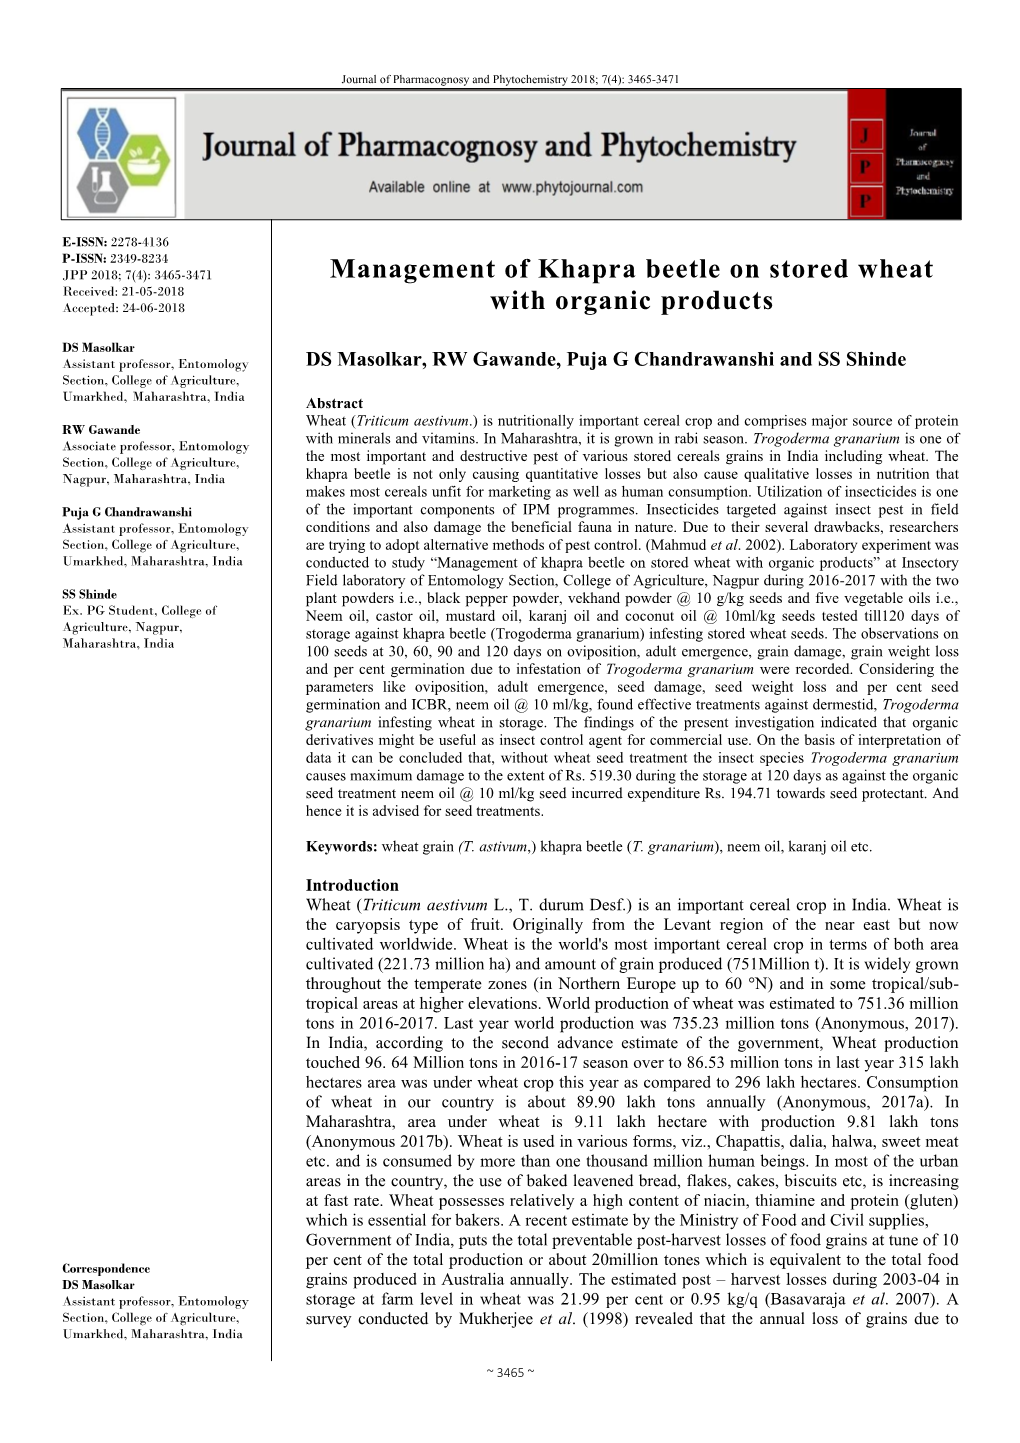 Management of Khapra Beetle on Stored Wheat with Organic Products